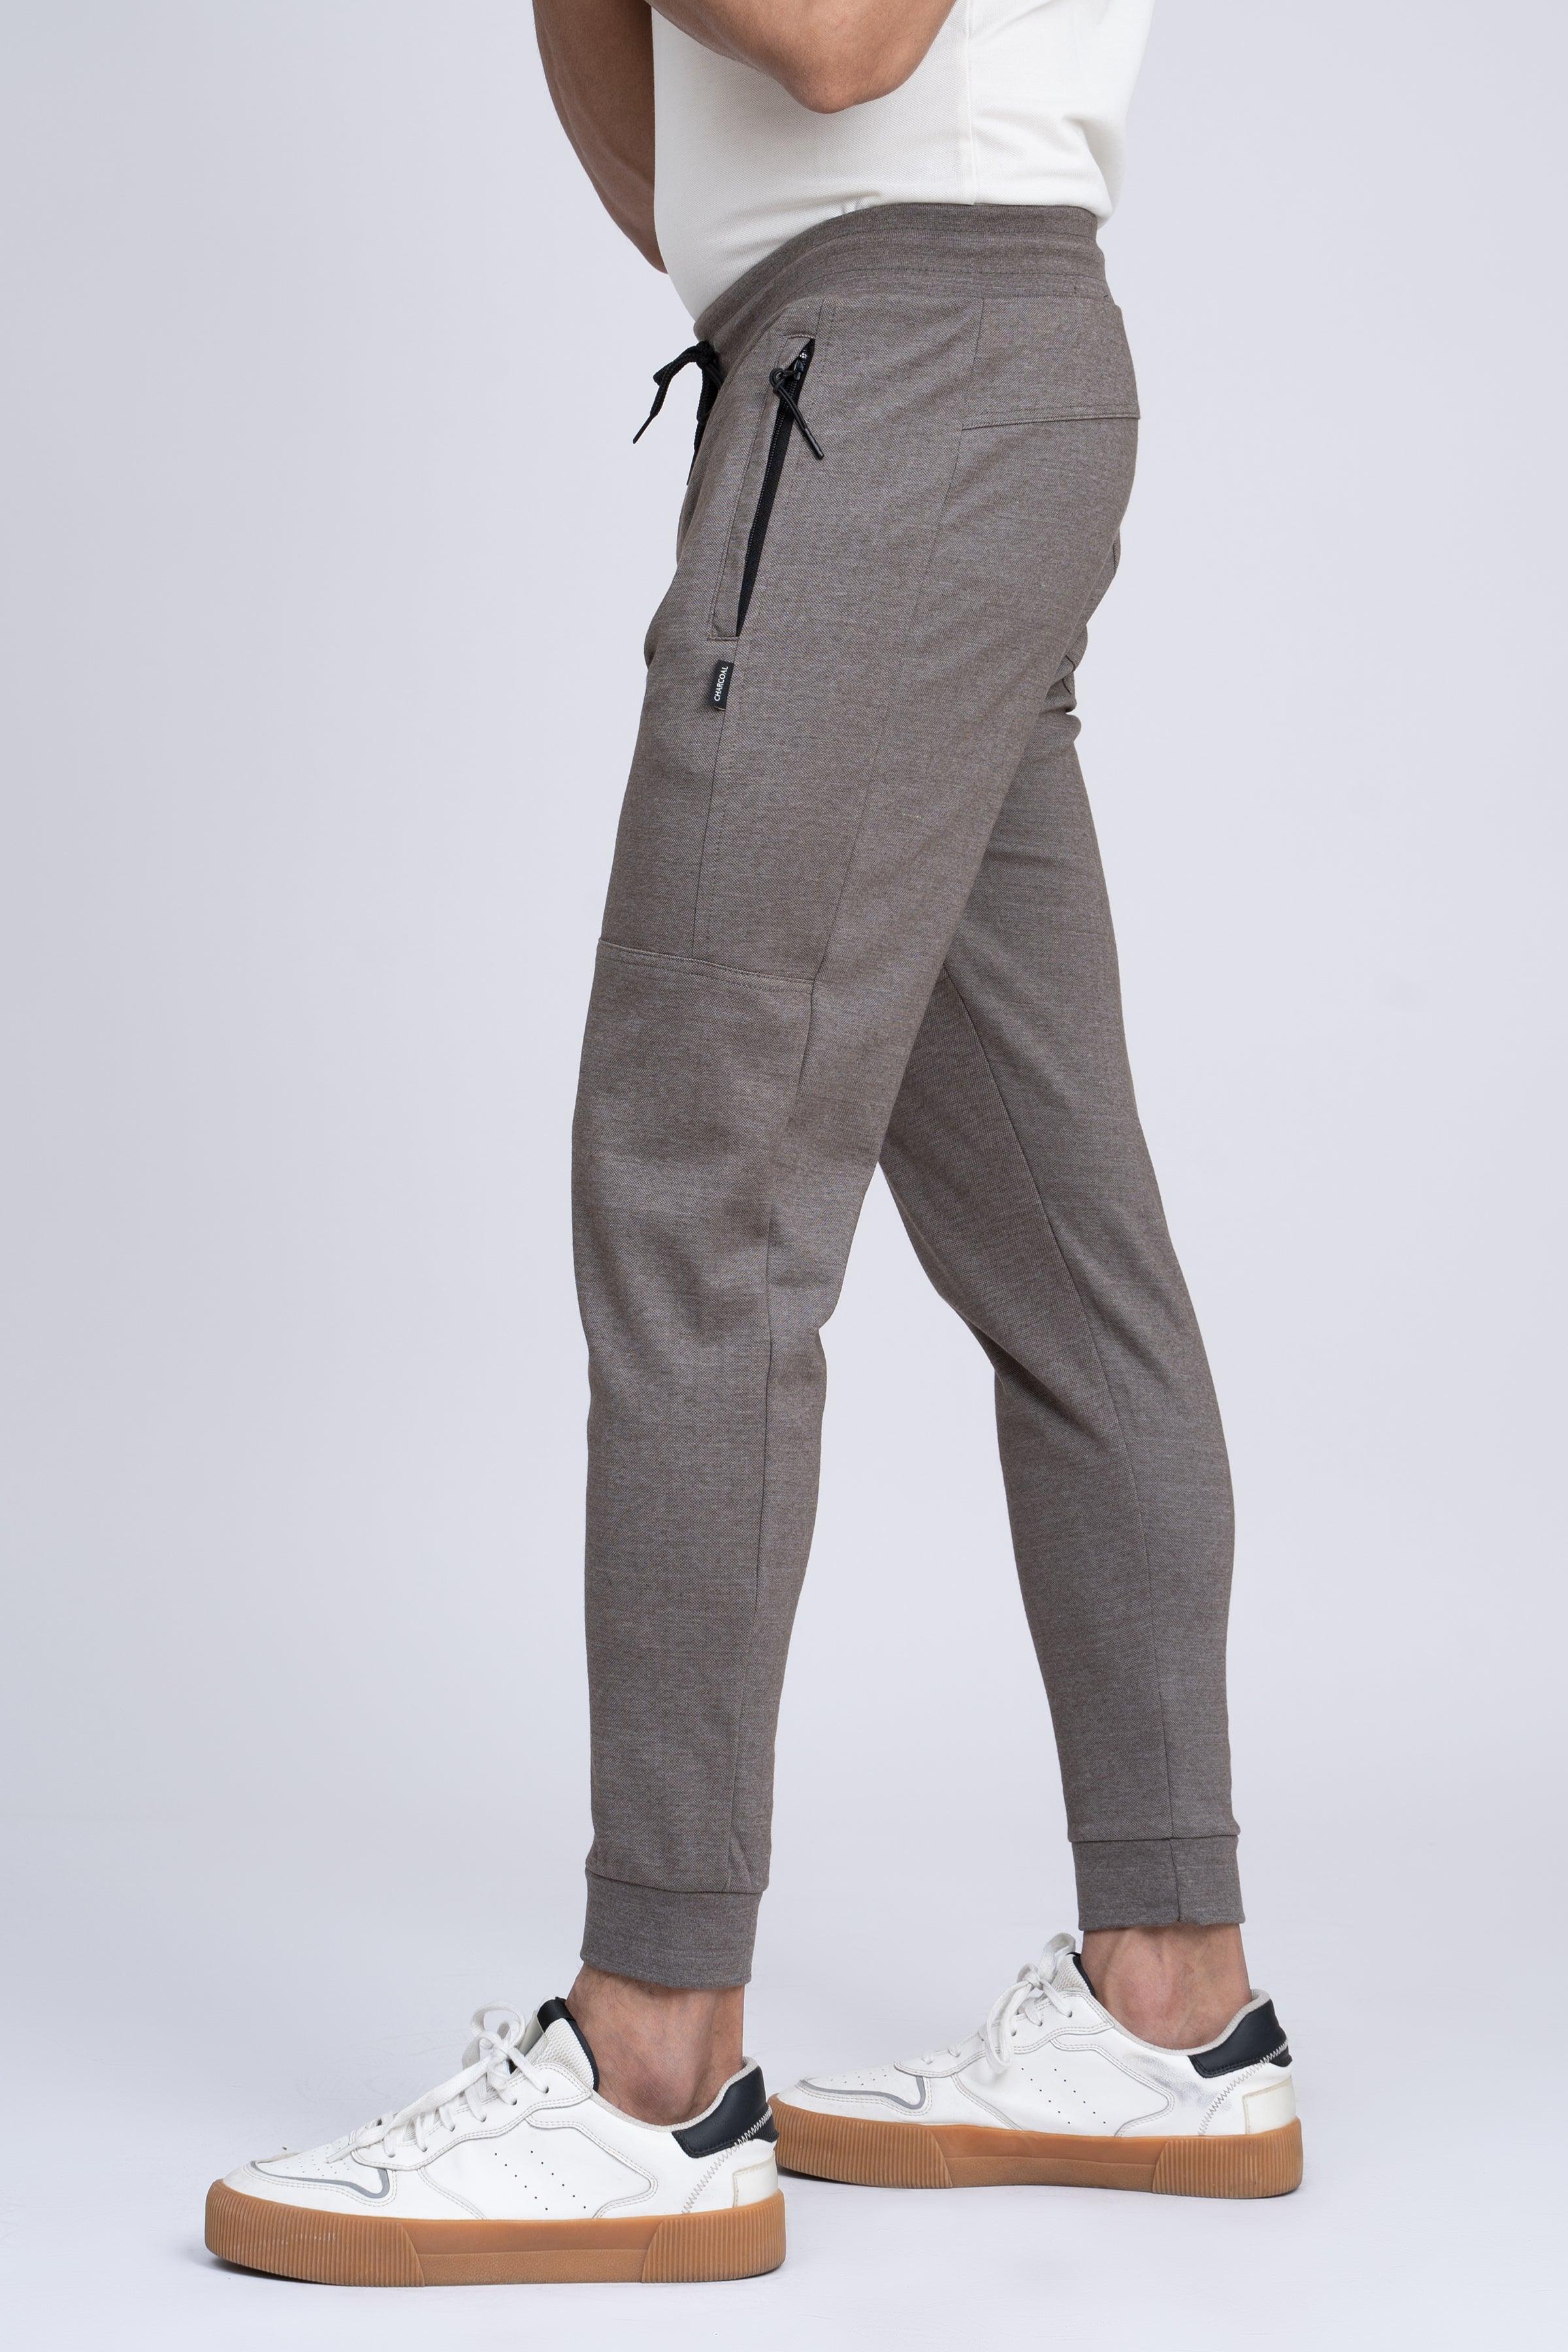 PIQUE INTERLOCK TROUSER OLIVE at Charcoal Clothing